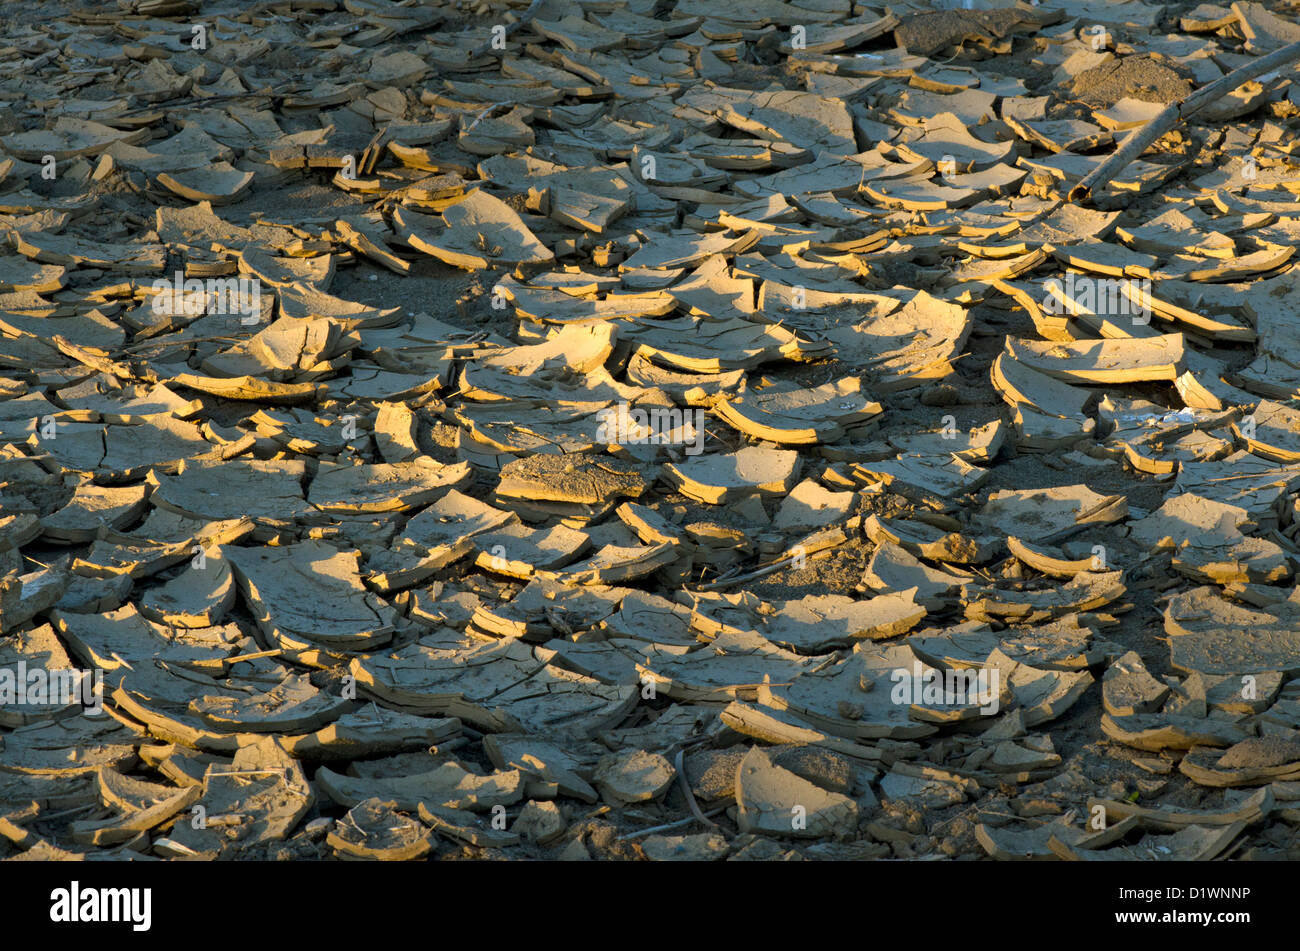 Cracked dry earth, drought on the ground, Spain Stock Photo